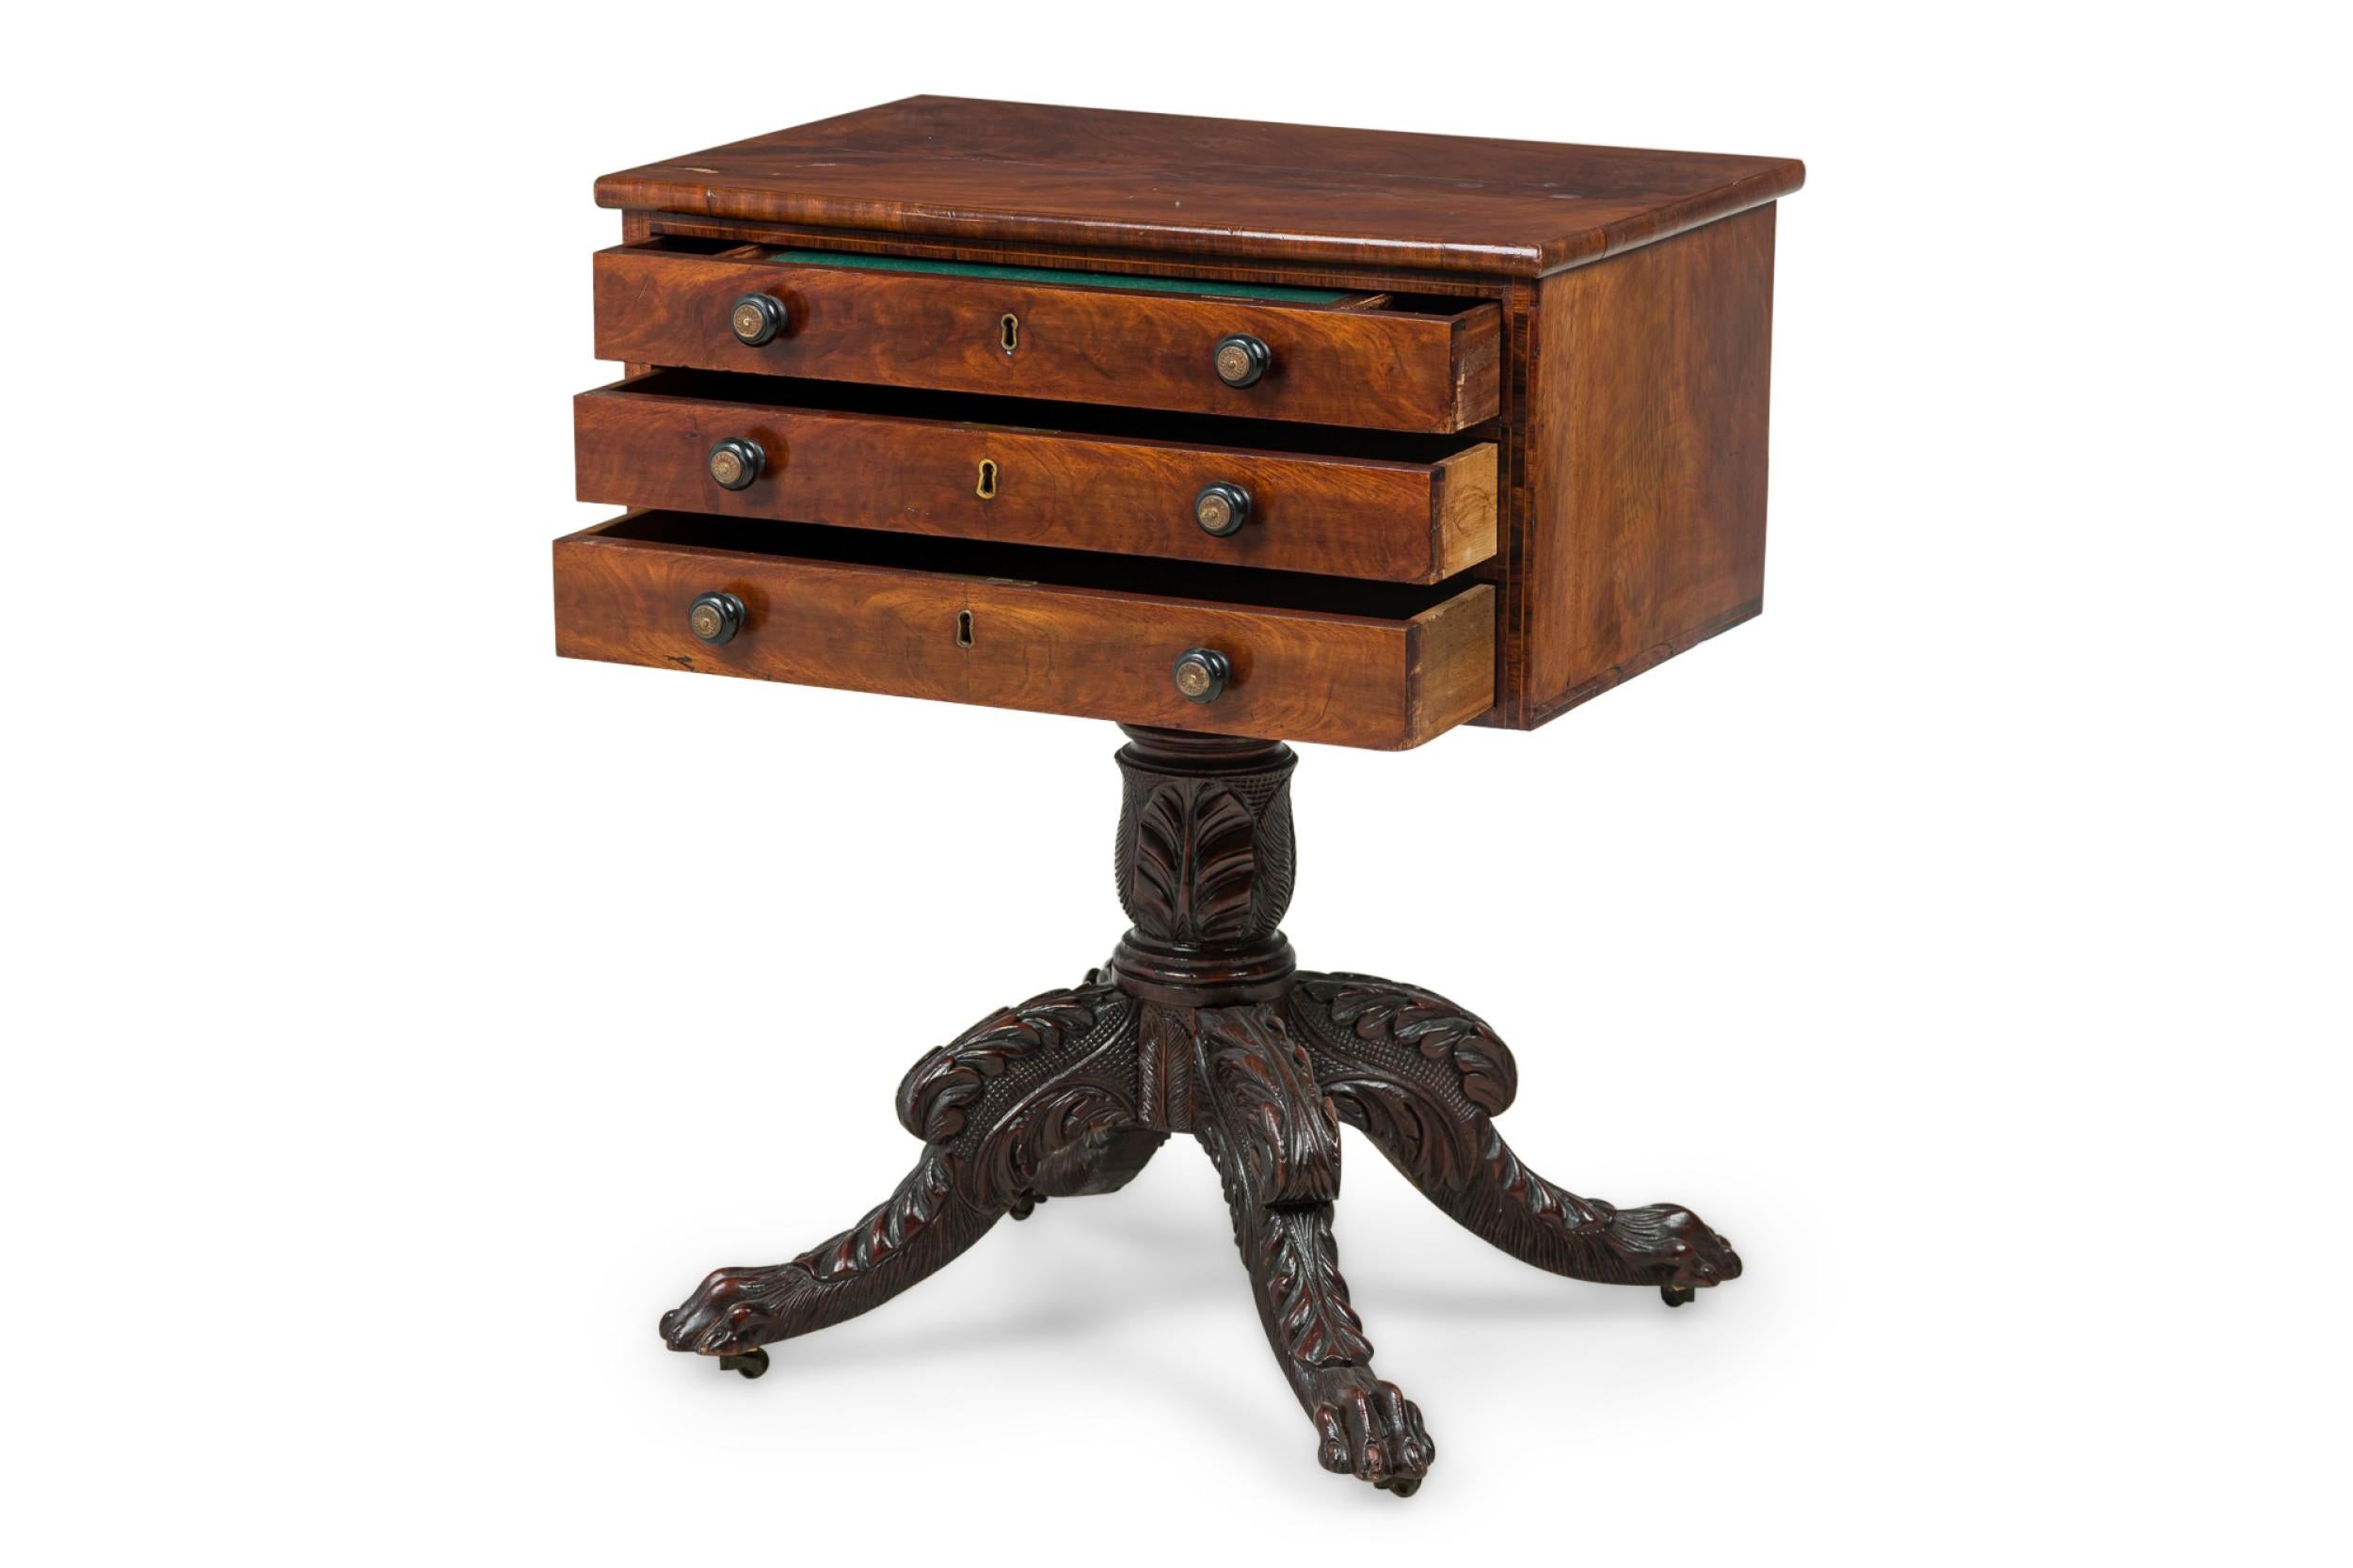 North American American Empire mahogany Side Table by Duncan Phyfe